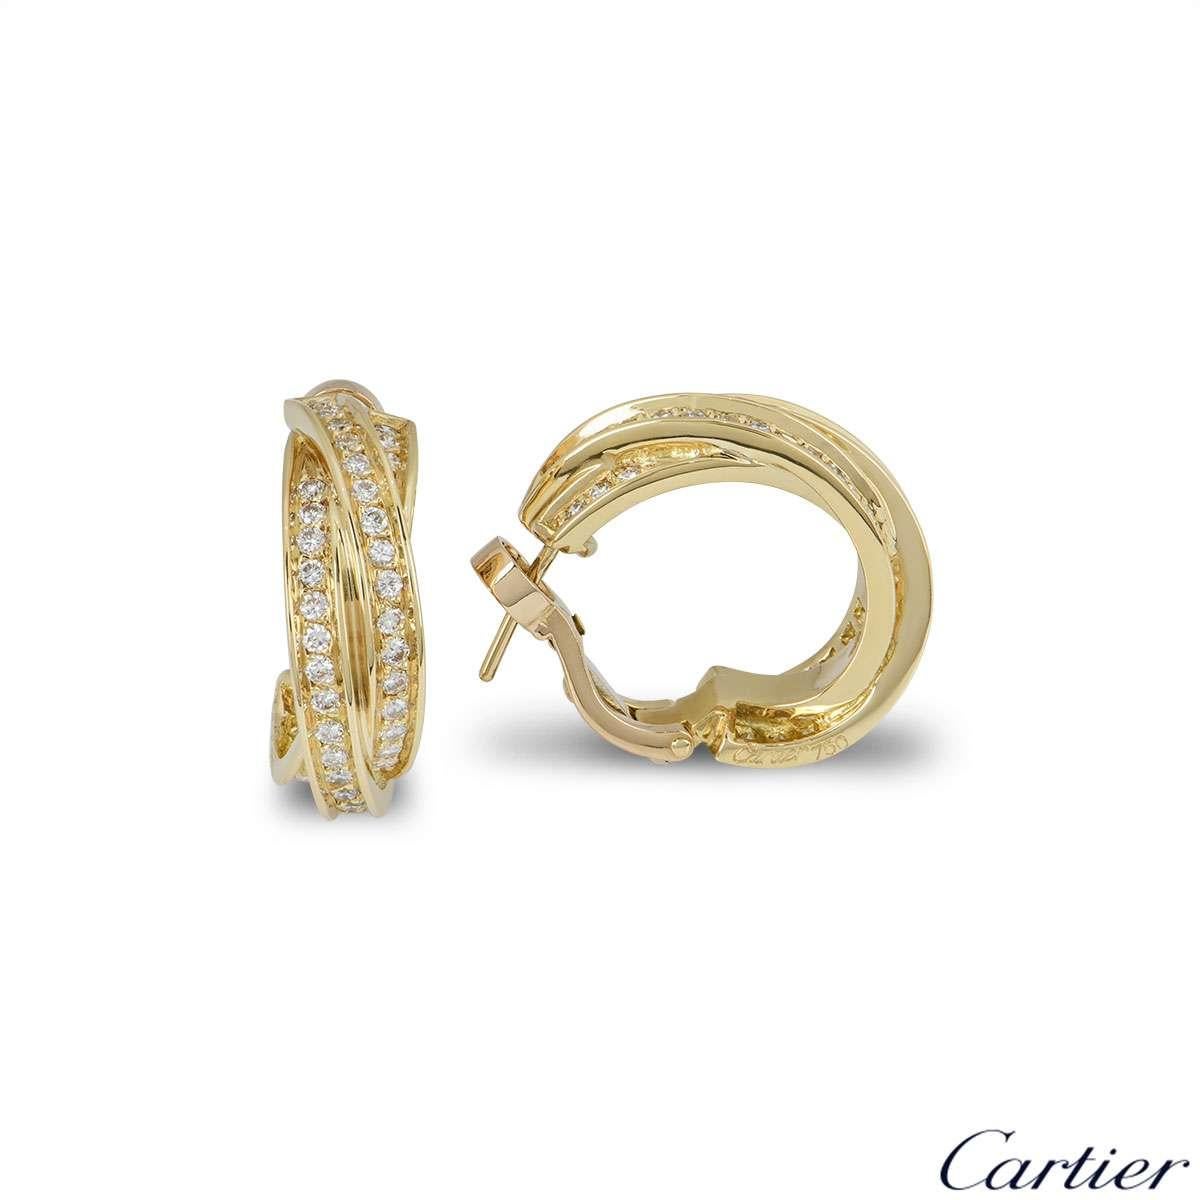 A sparkly pair of 18k yellow gold Cartier diamond hoop earrings from the Trinity de Cartier collection. The earrings comprise of 3 intertwined yellow gold bands with round brilliant cut diamonds pave set throughout. The earrings measure 22mm in